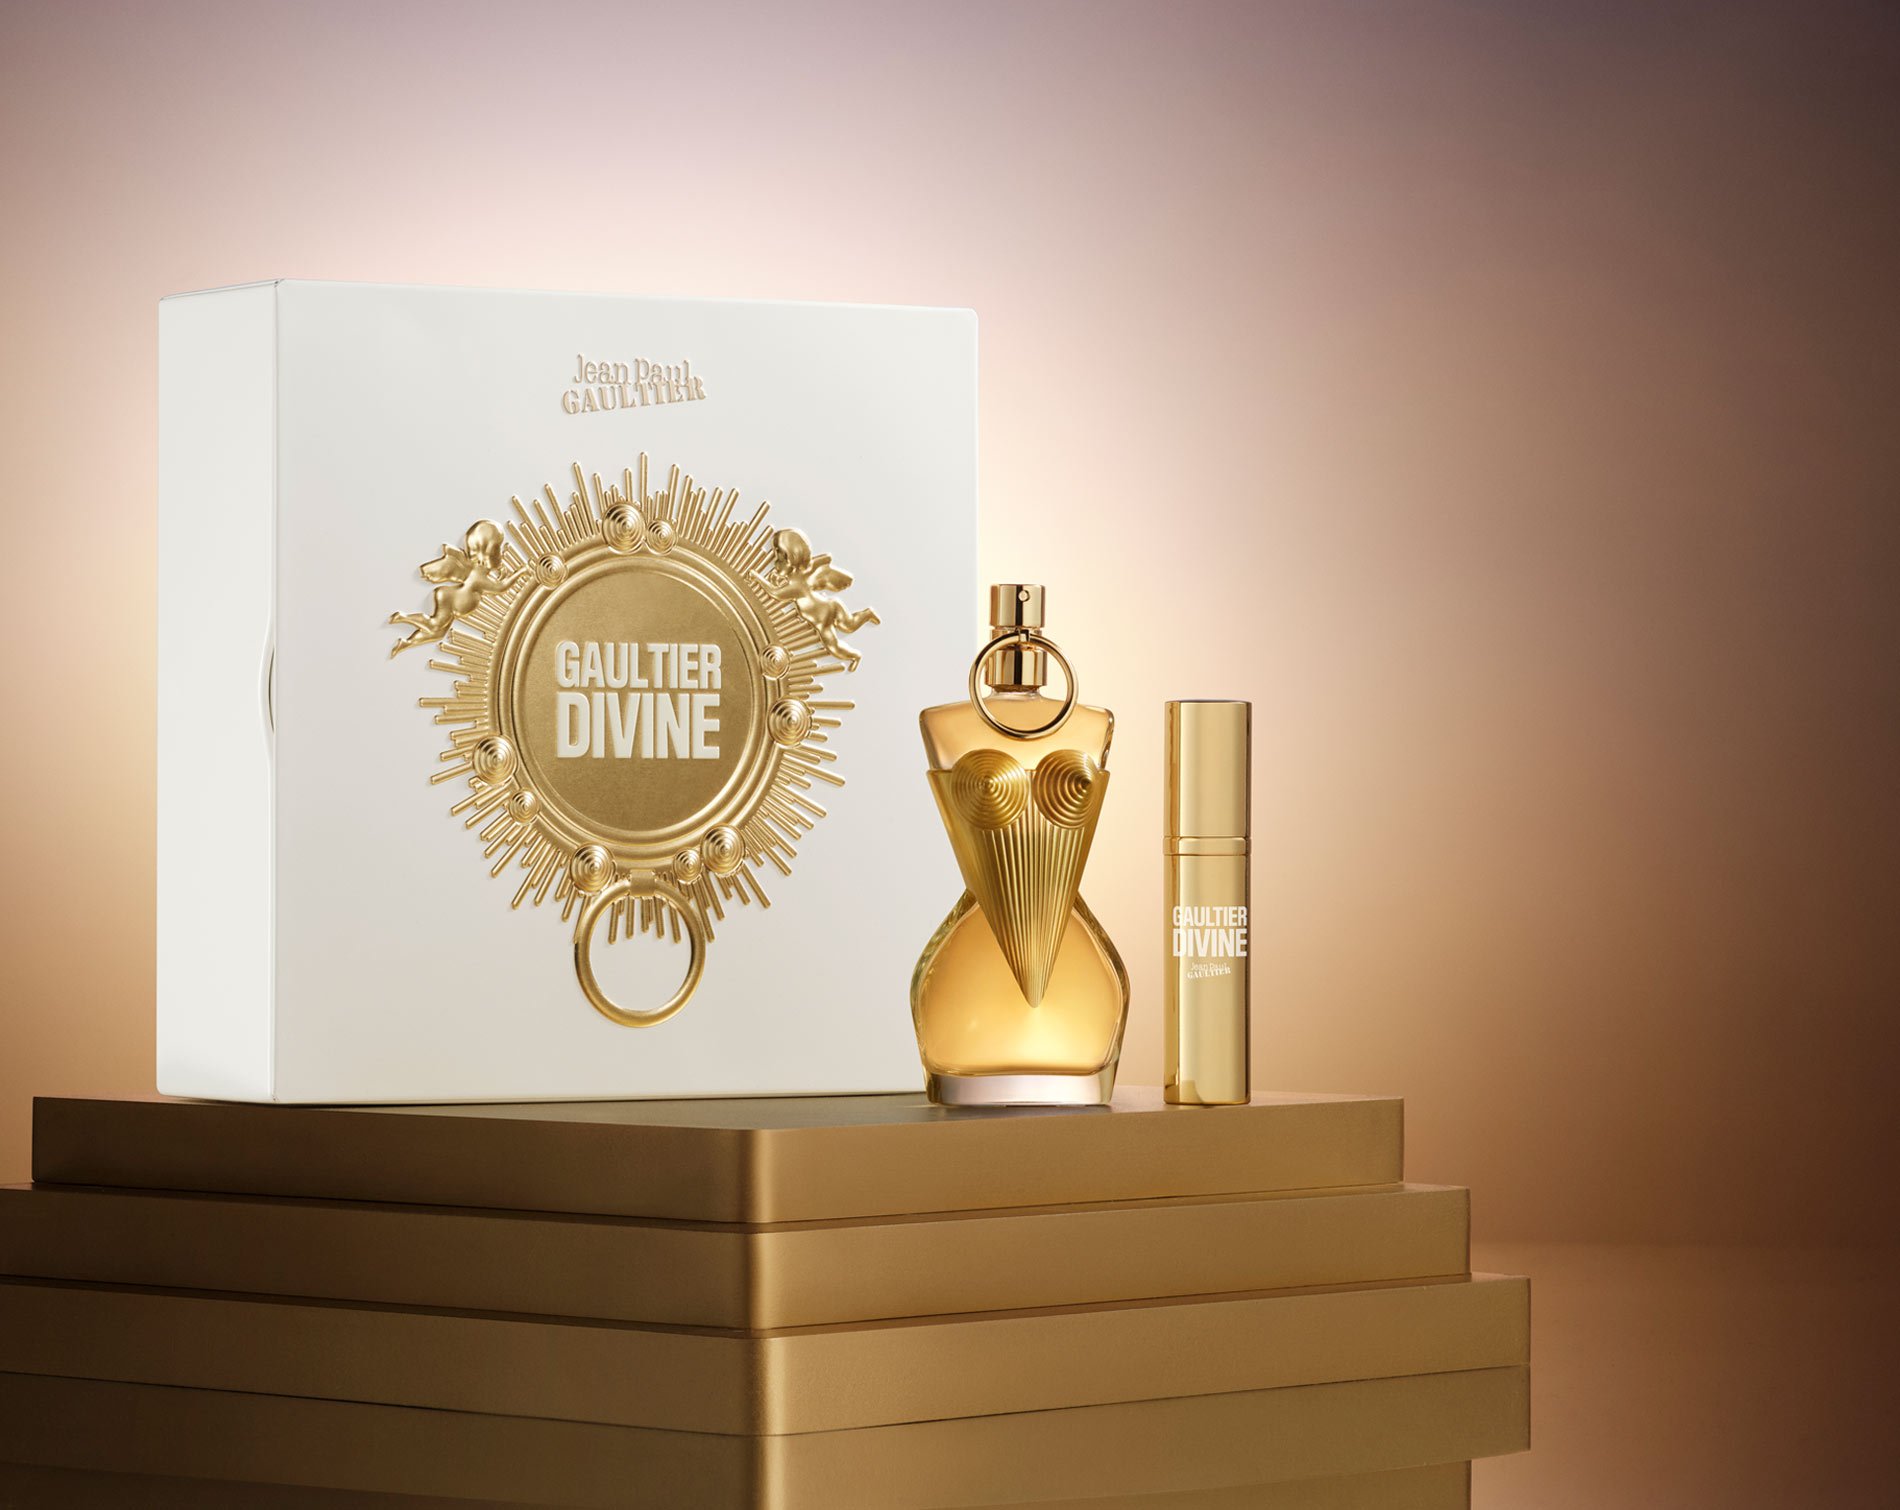 Gaultier Divine gift set still life with gold background